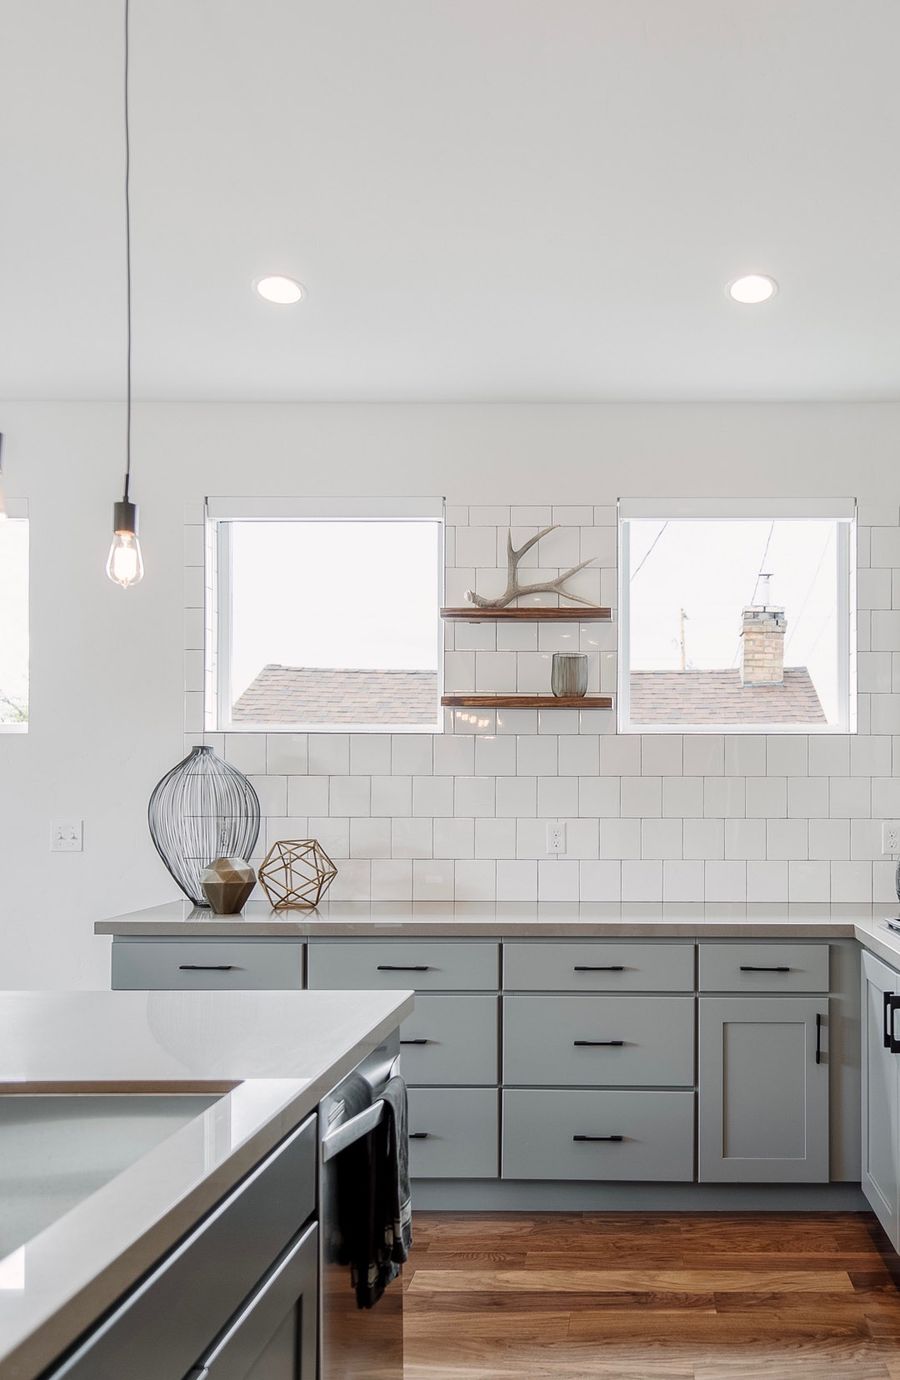 Metal Decor Accents and Bare Bulb Lighting in Industrial Kitchen via Mikelle Mabey